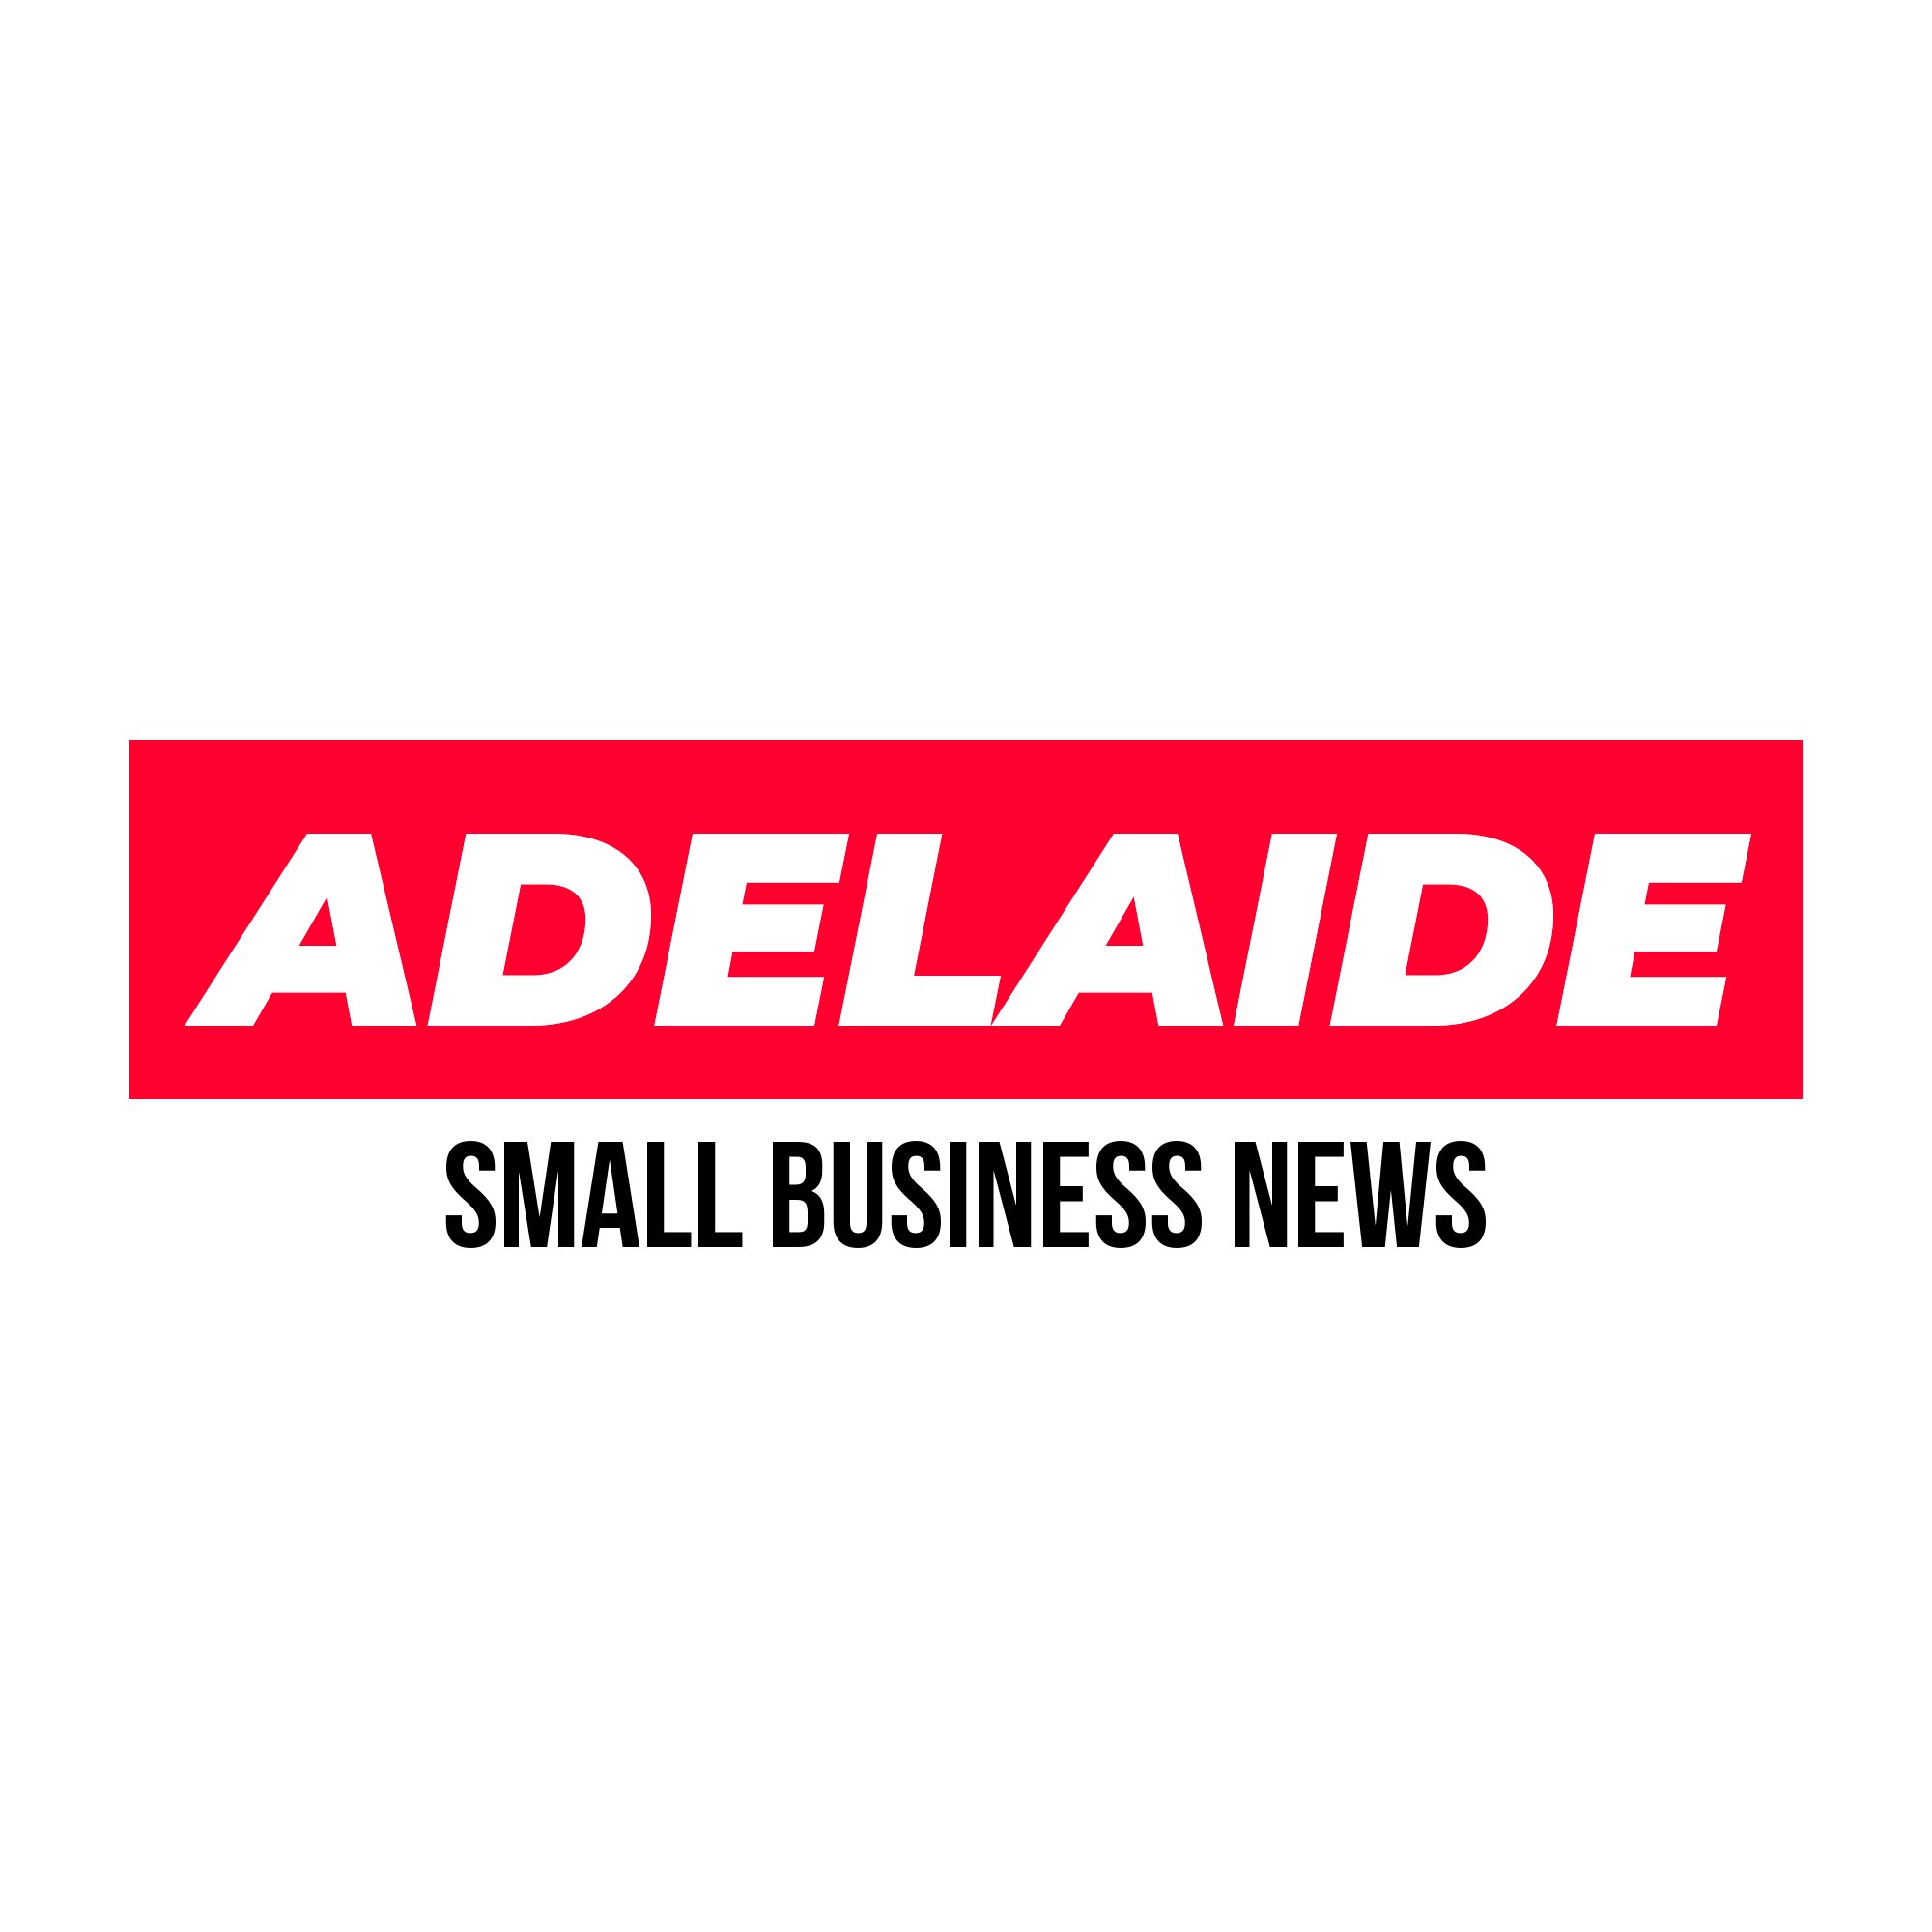 Adelaide Small Business News